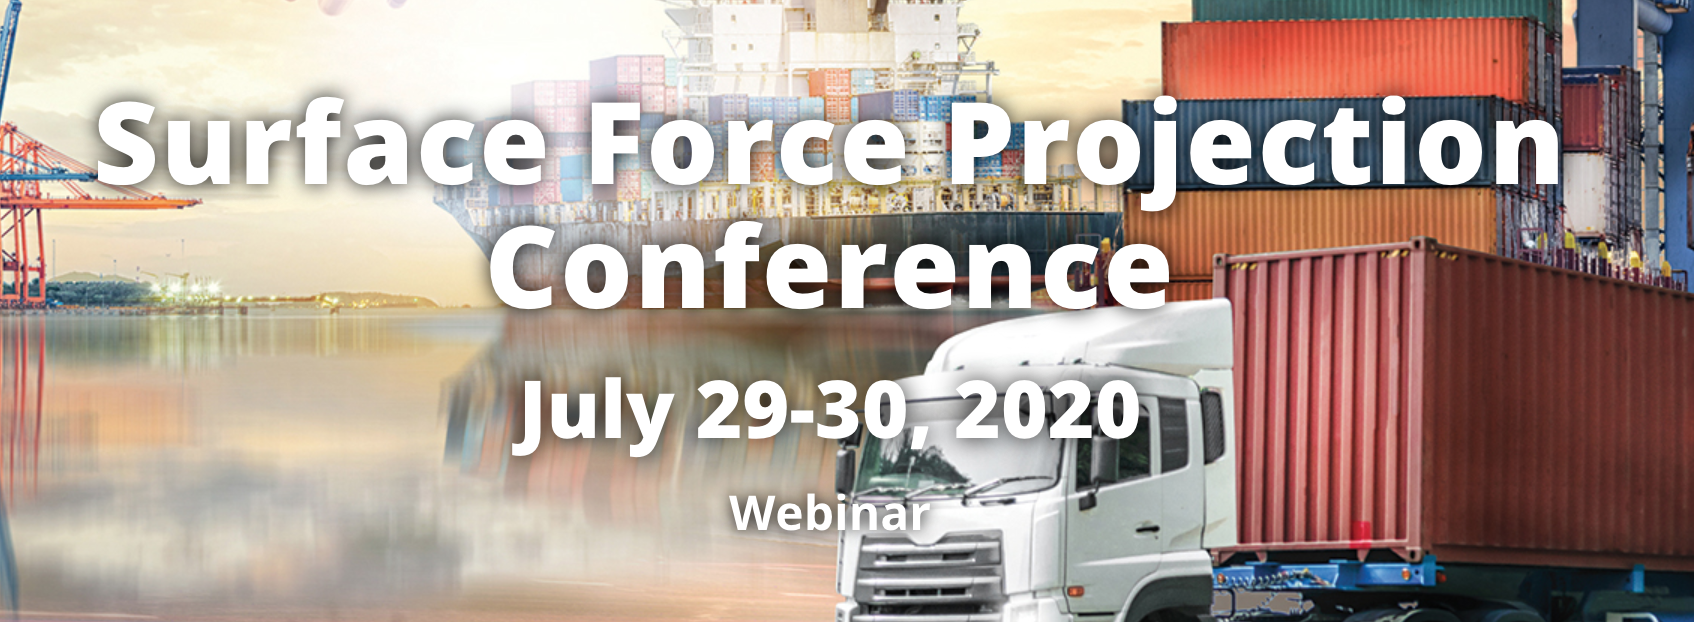 Savi sponsors 2020 Surface Force Projection Conference, which will include discussion on warfighter readiness with COVID-19 impact